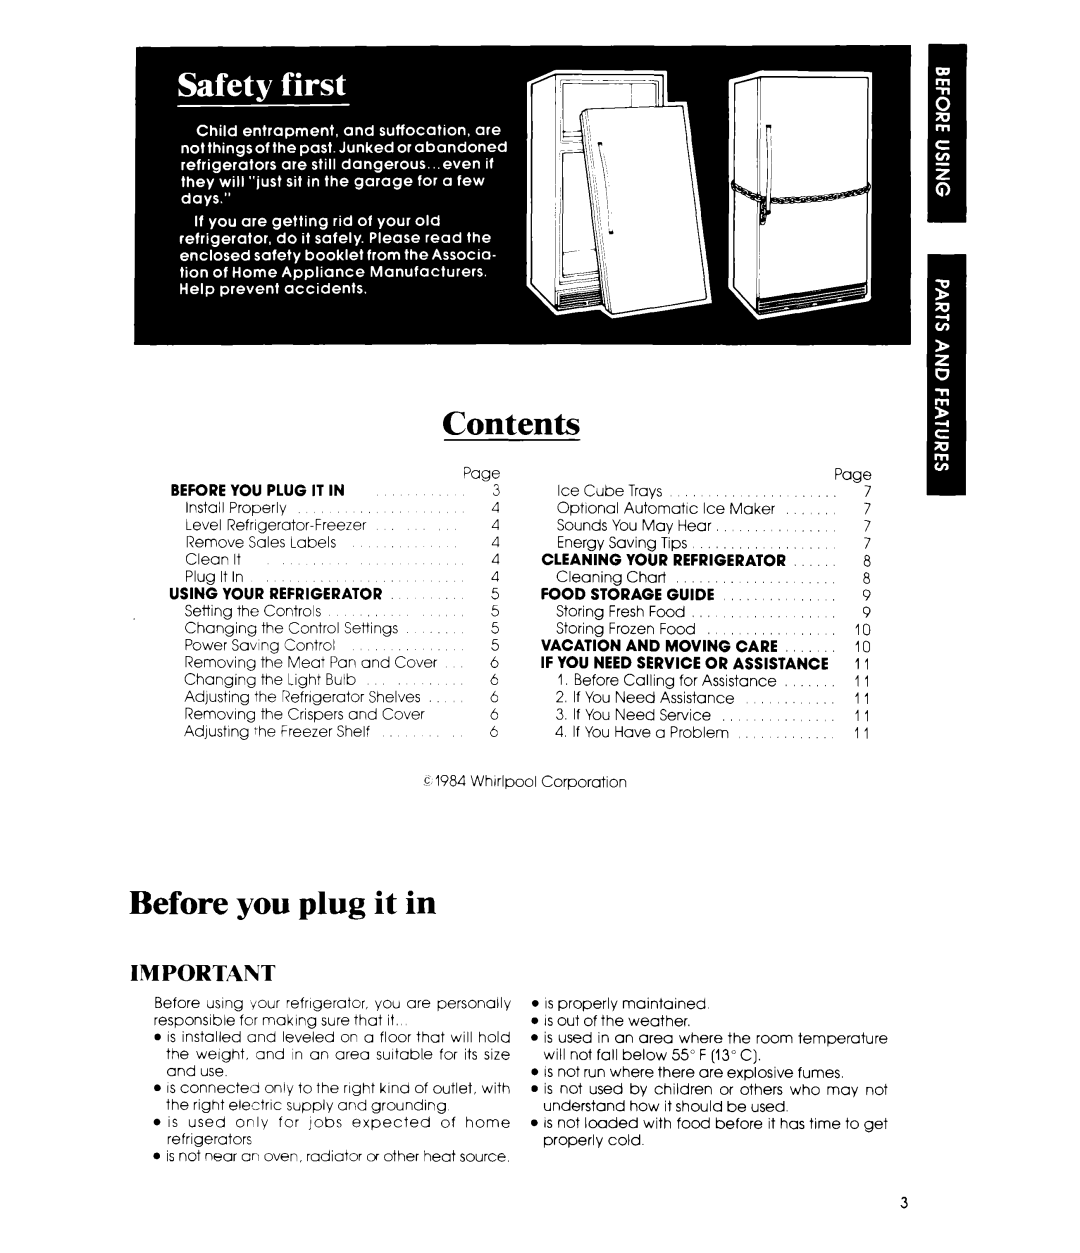 Whirlpool ETl8CK manual Contents, Before you plug it in, Beforeyou Plug It In, Using Your Refrigerator, Food Storage Guide 